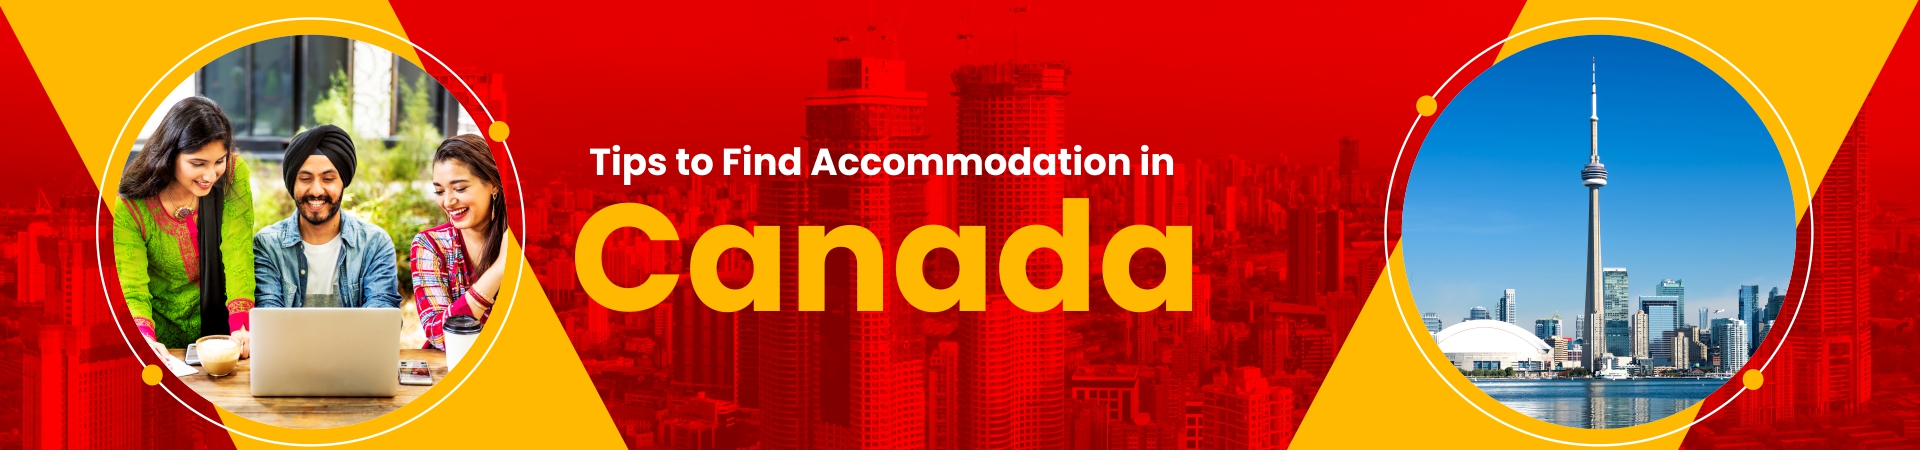 Finding Accommodation in Canada: Helpful Tips